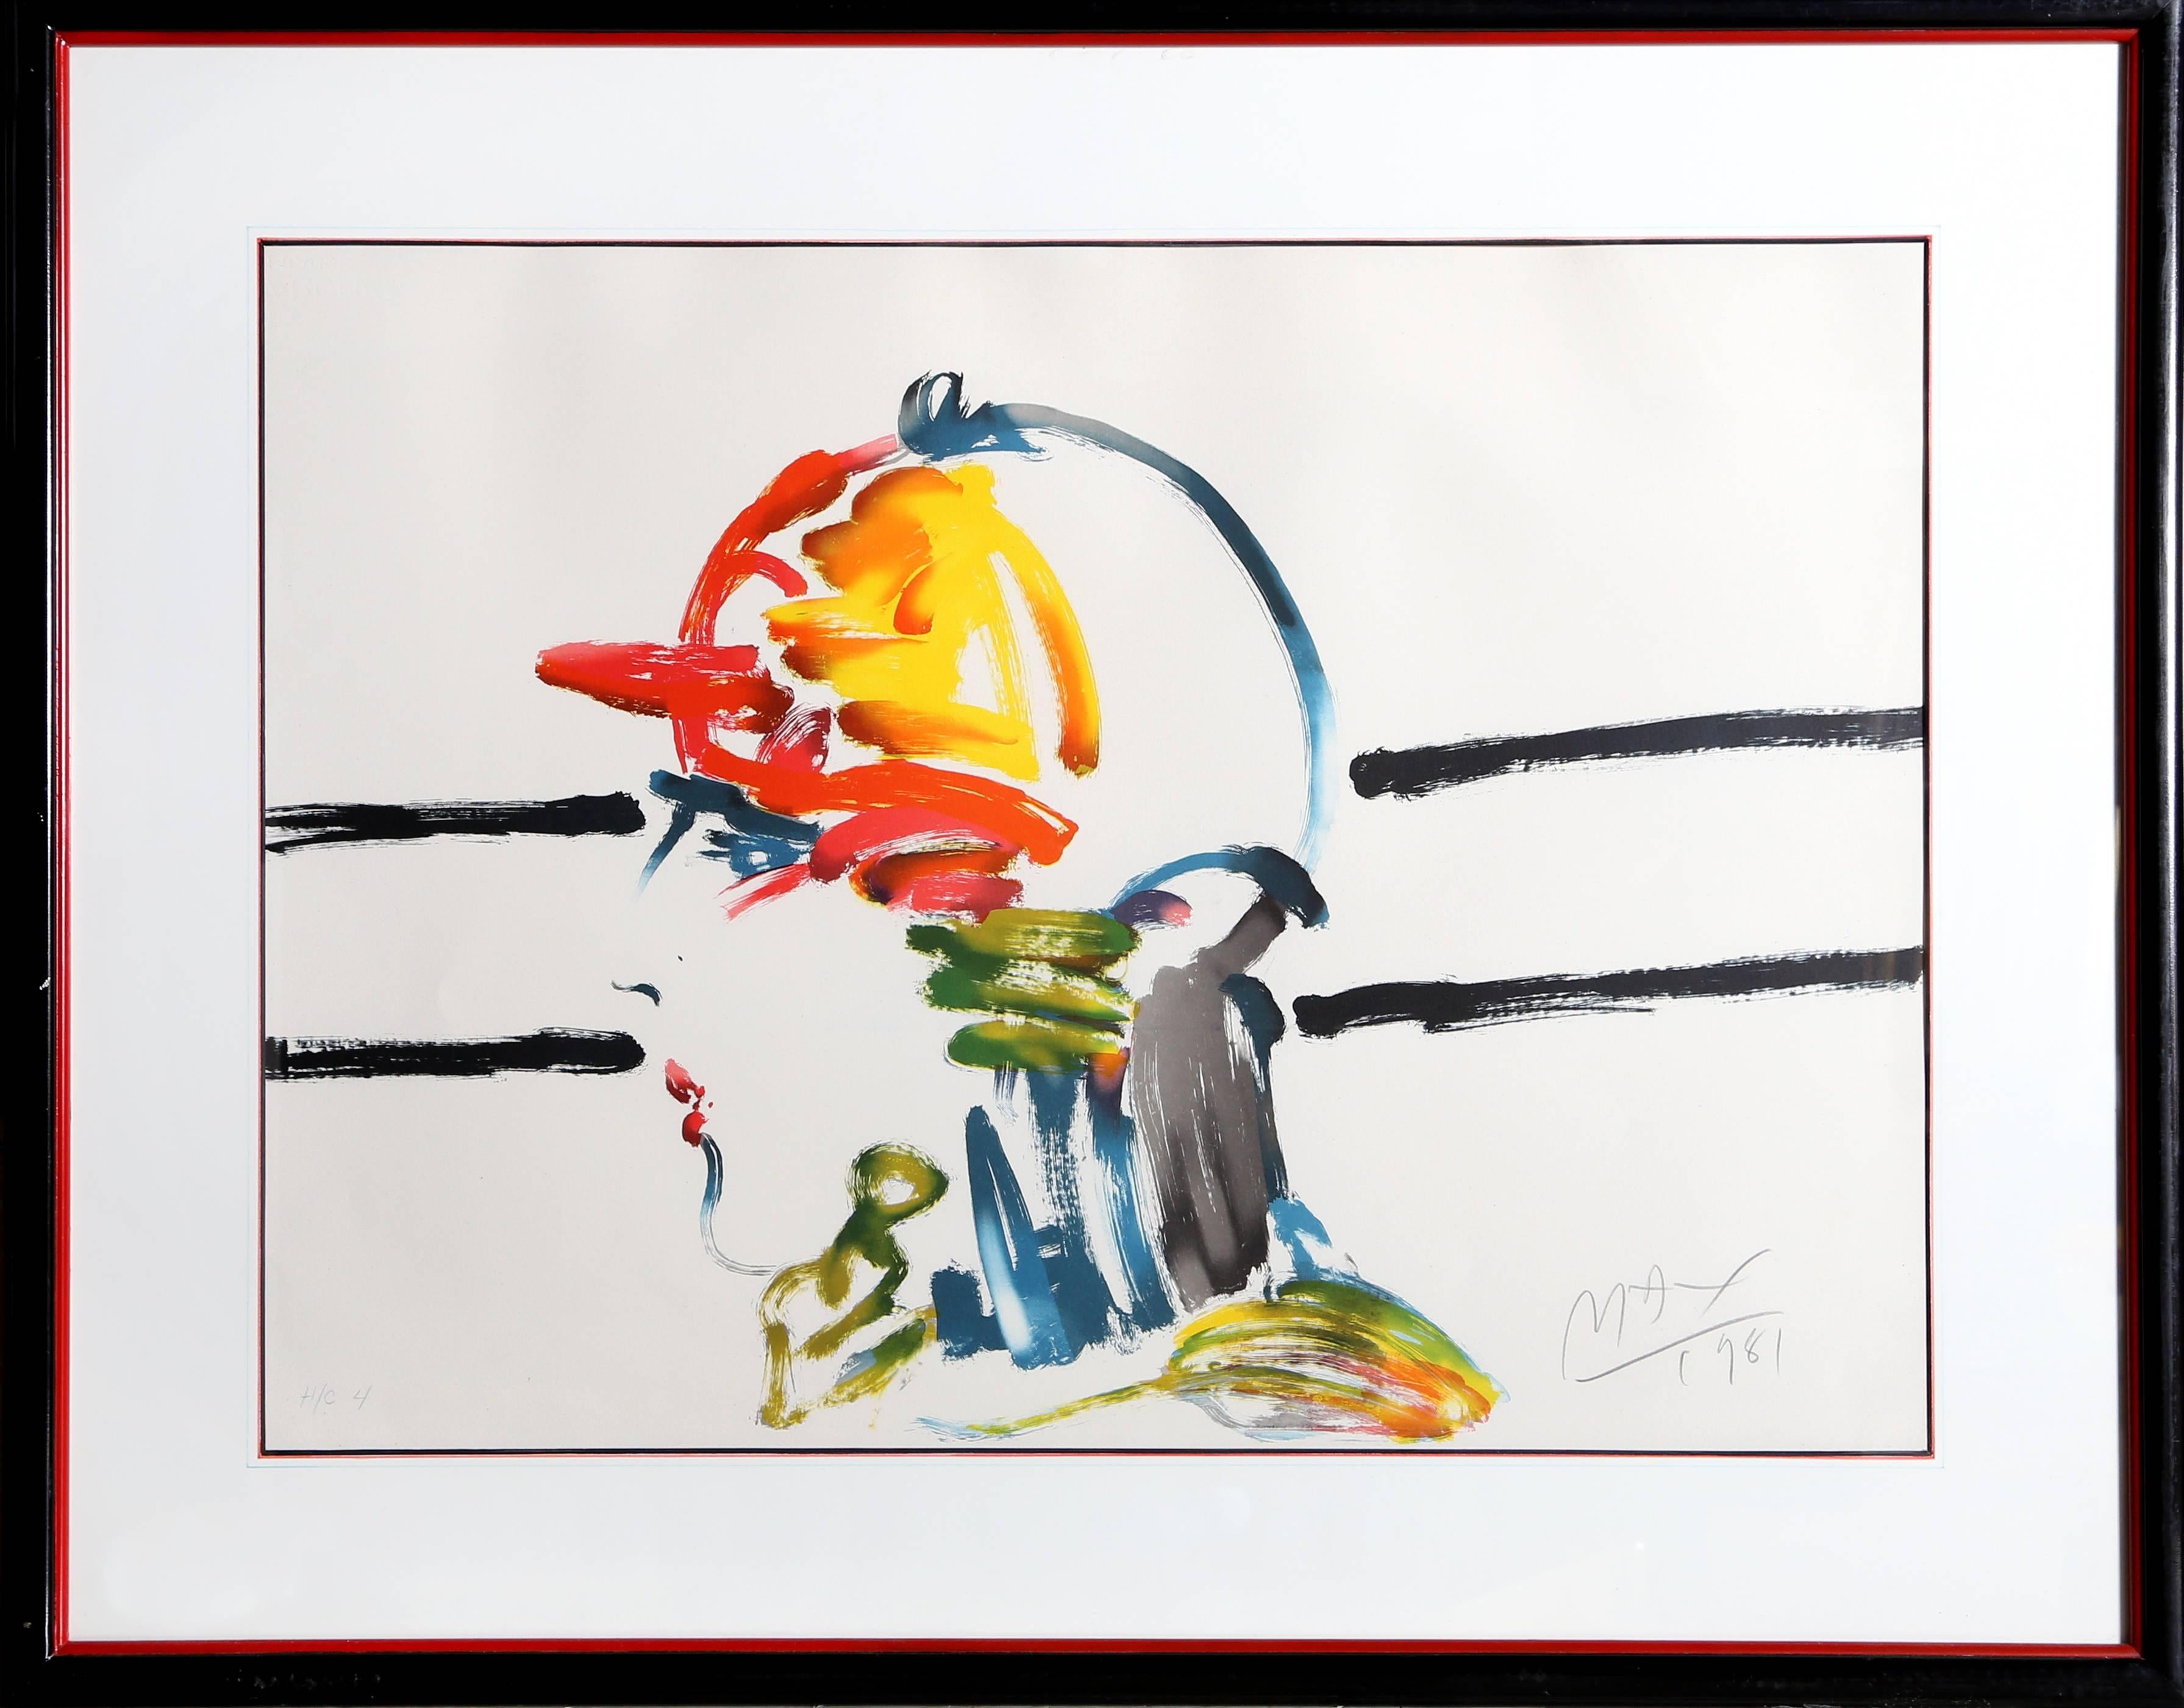 Peter Max Portrait Print - "Jockey, " Lithograph on Arches paper, 1981